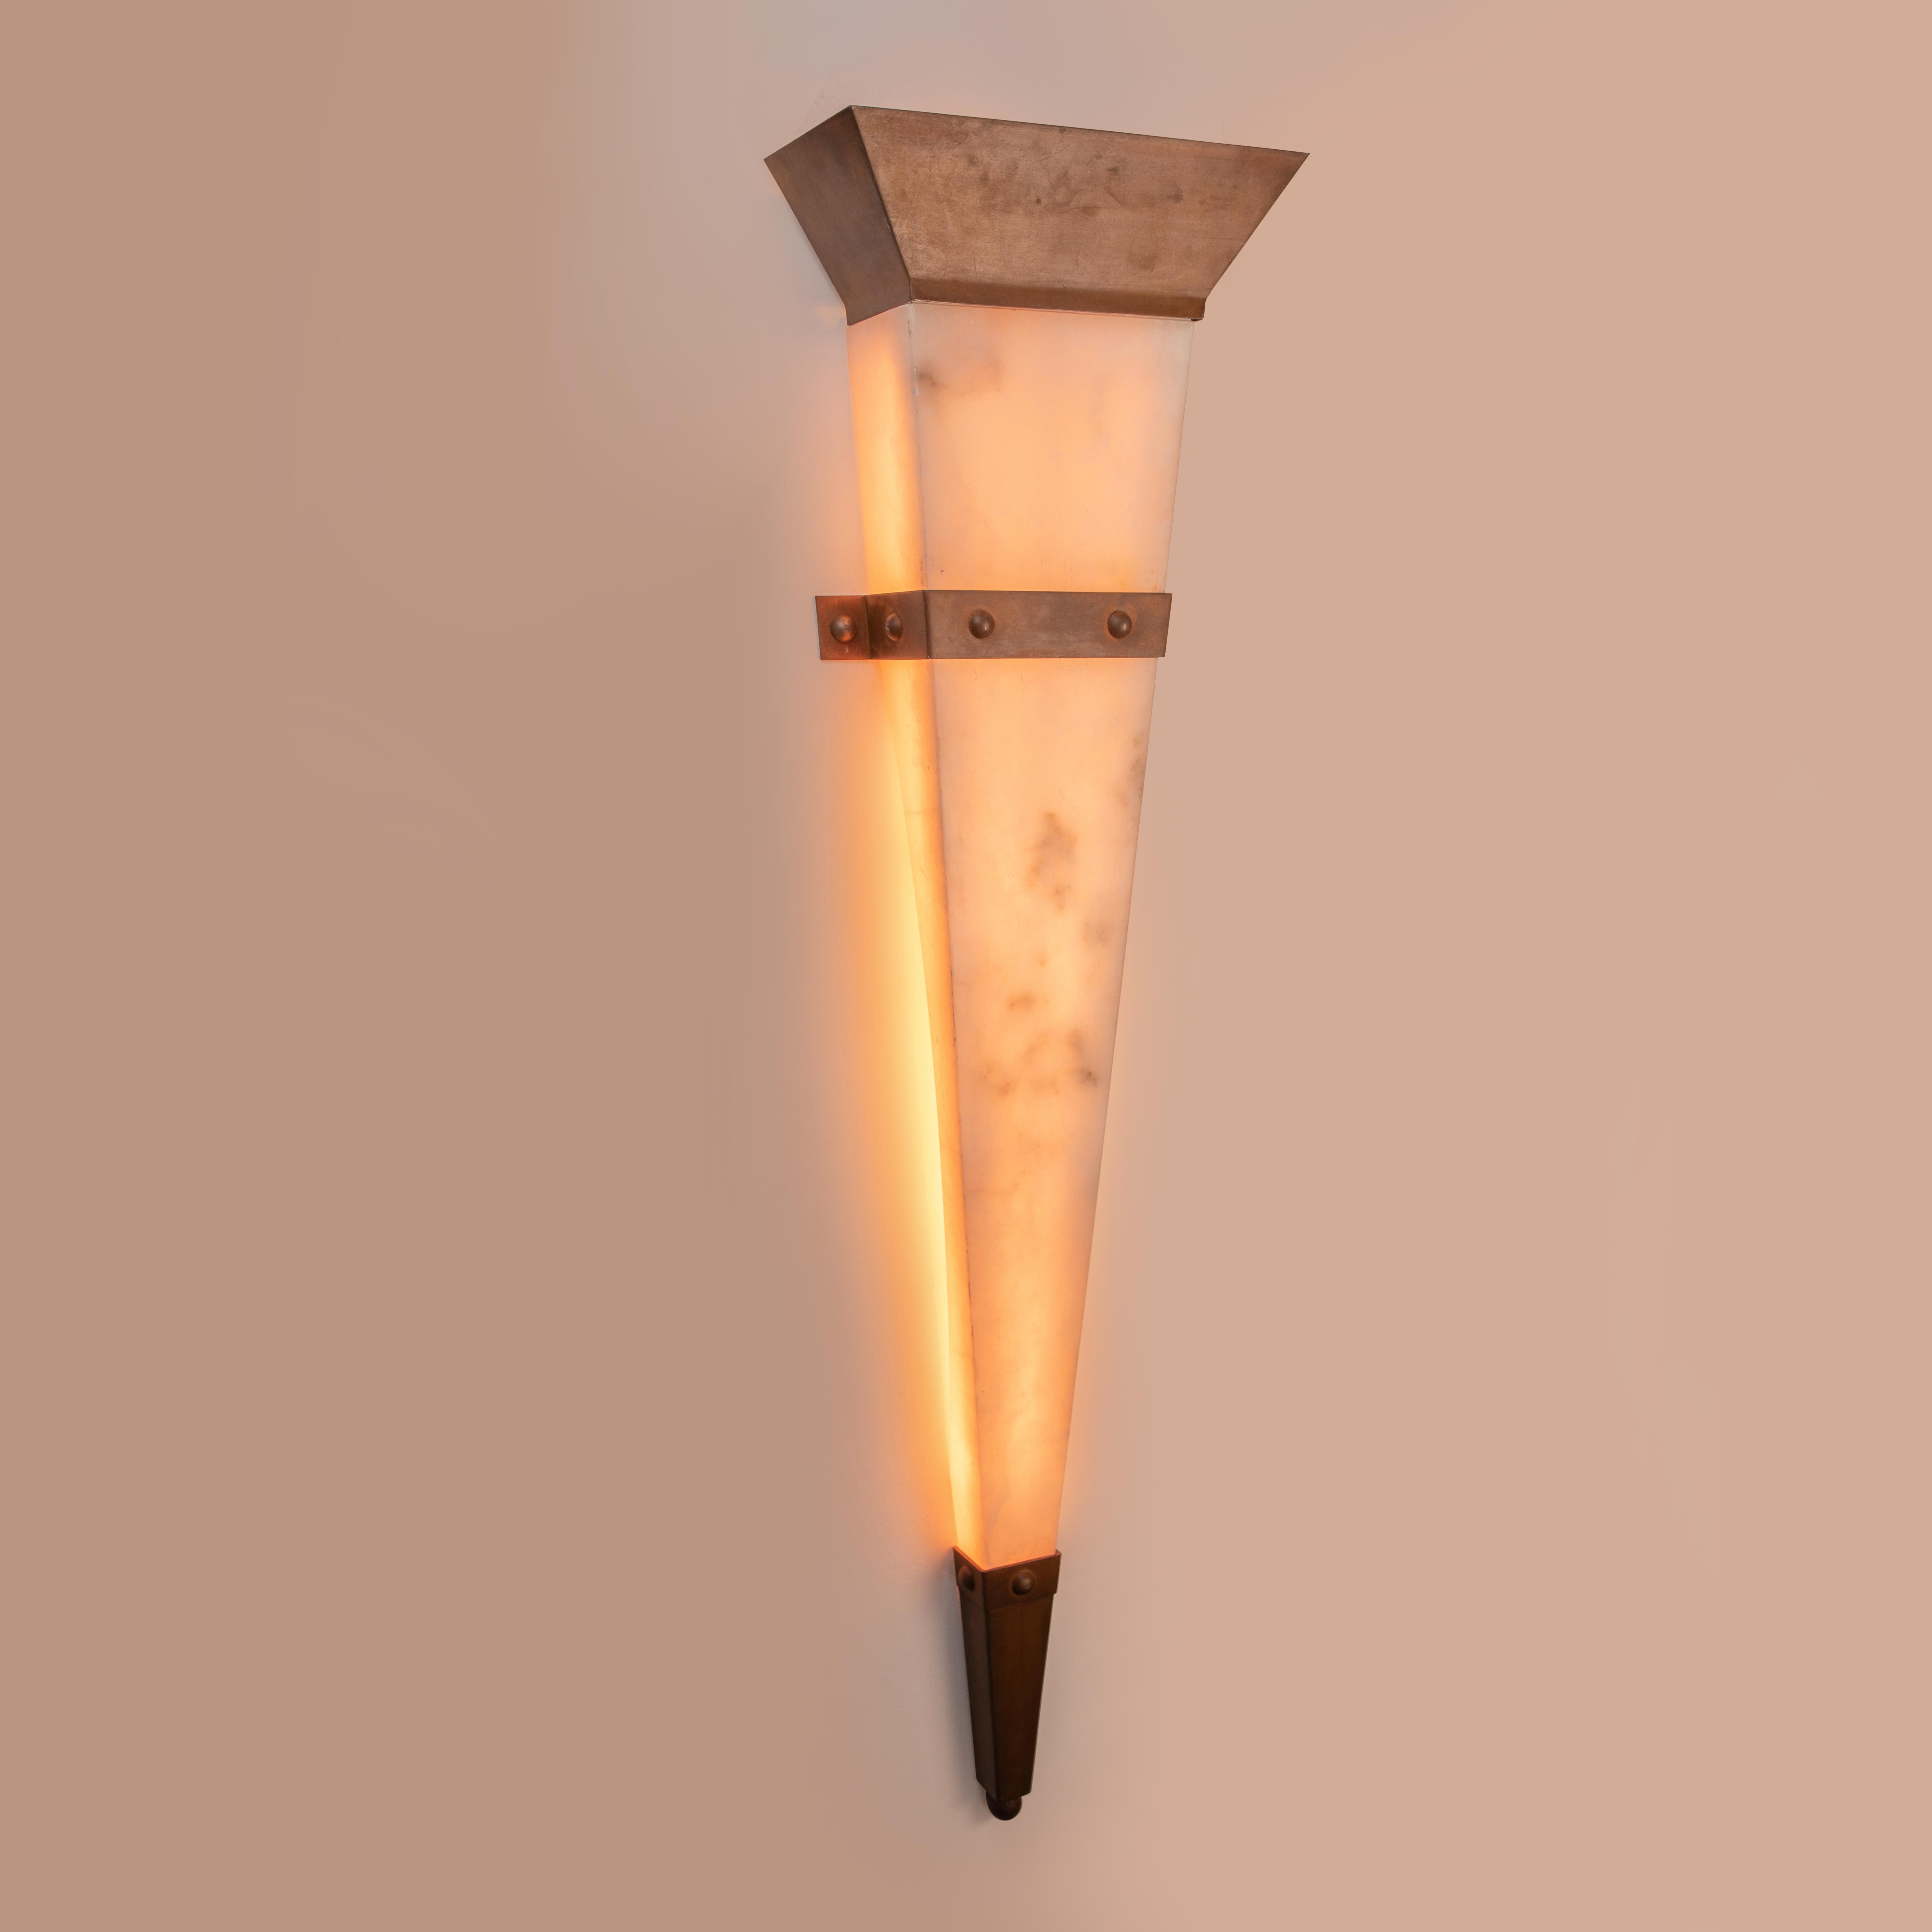 Christian Caudron, Large Contemporary Sconce, Alabaster, Fixings in Corten Steel For Sale 3